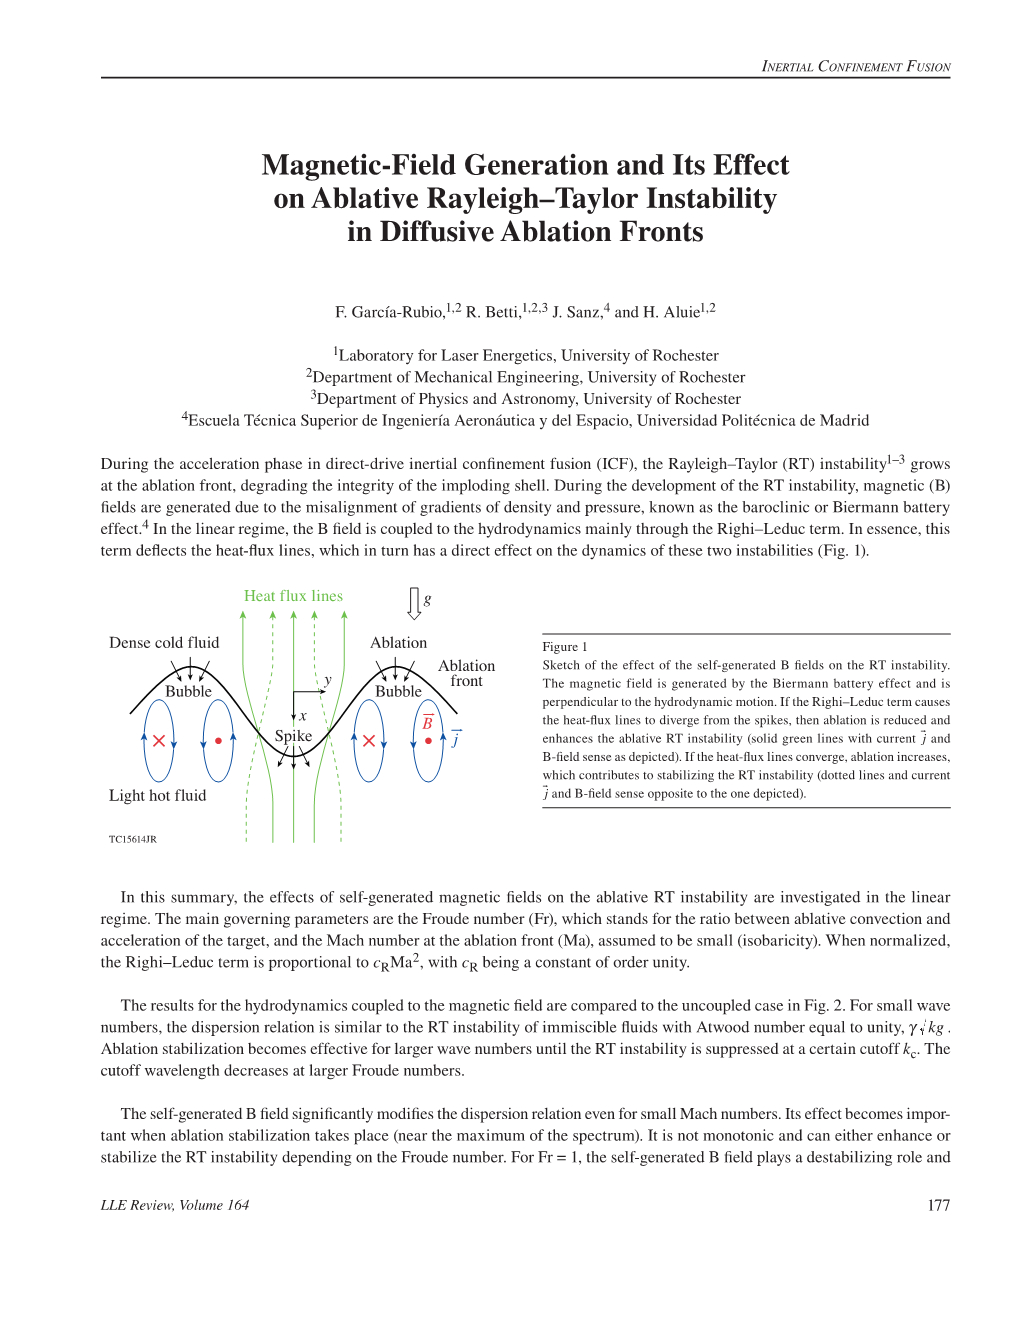 Magnetic-Field Generation and Its Effect on Ablative Rayleigh–Taylor Instability in Diffusive Ablation Fronts